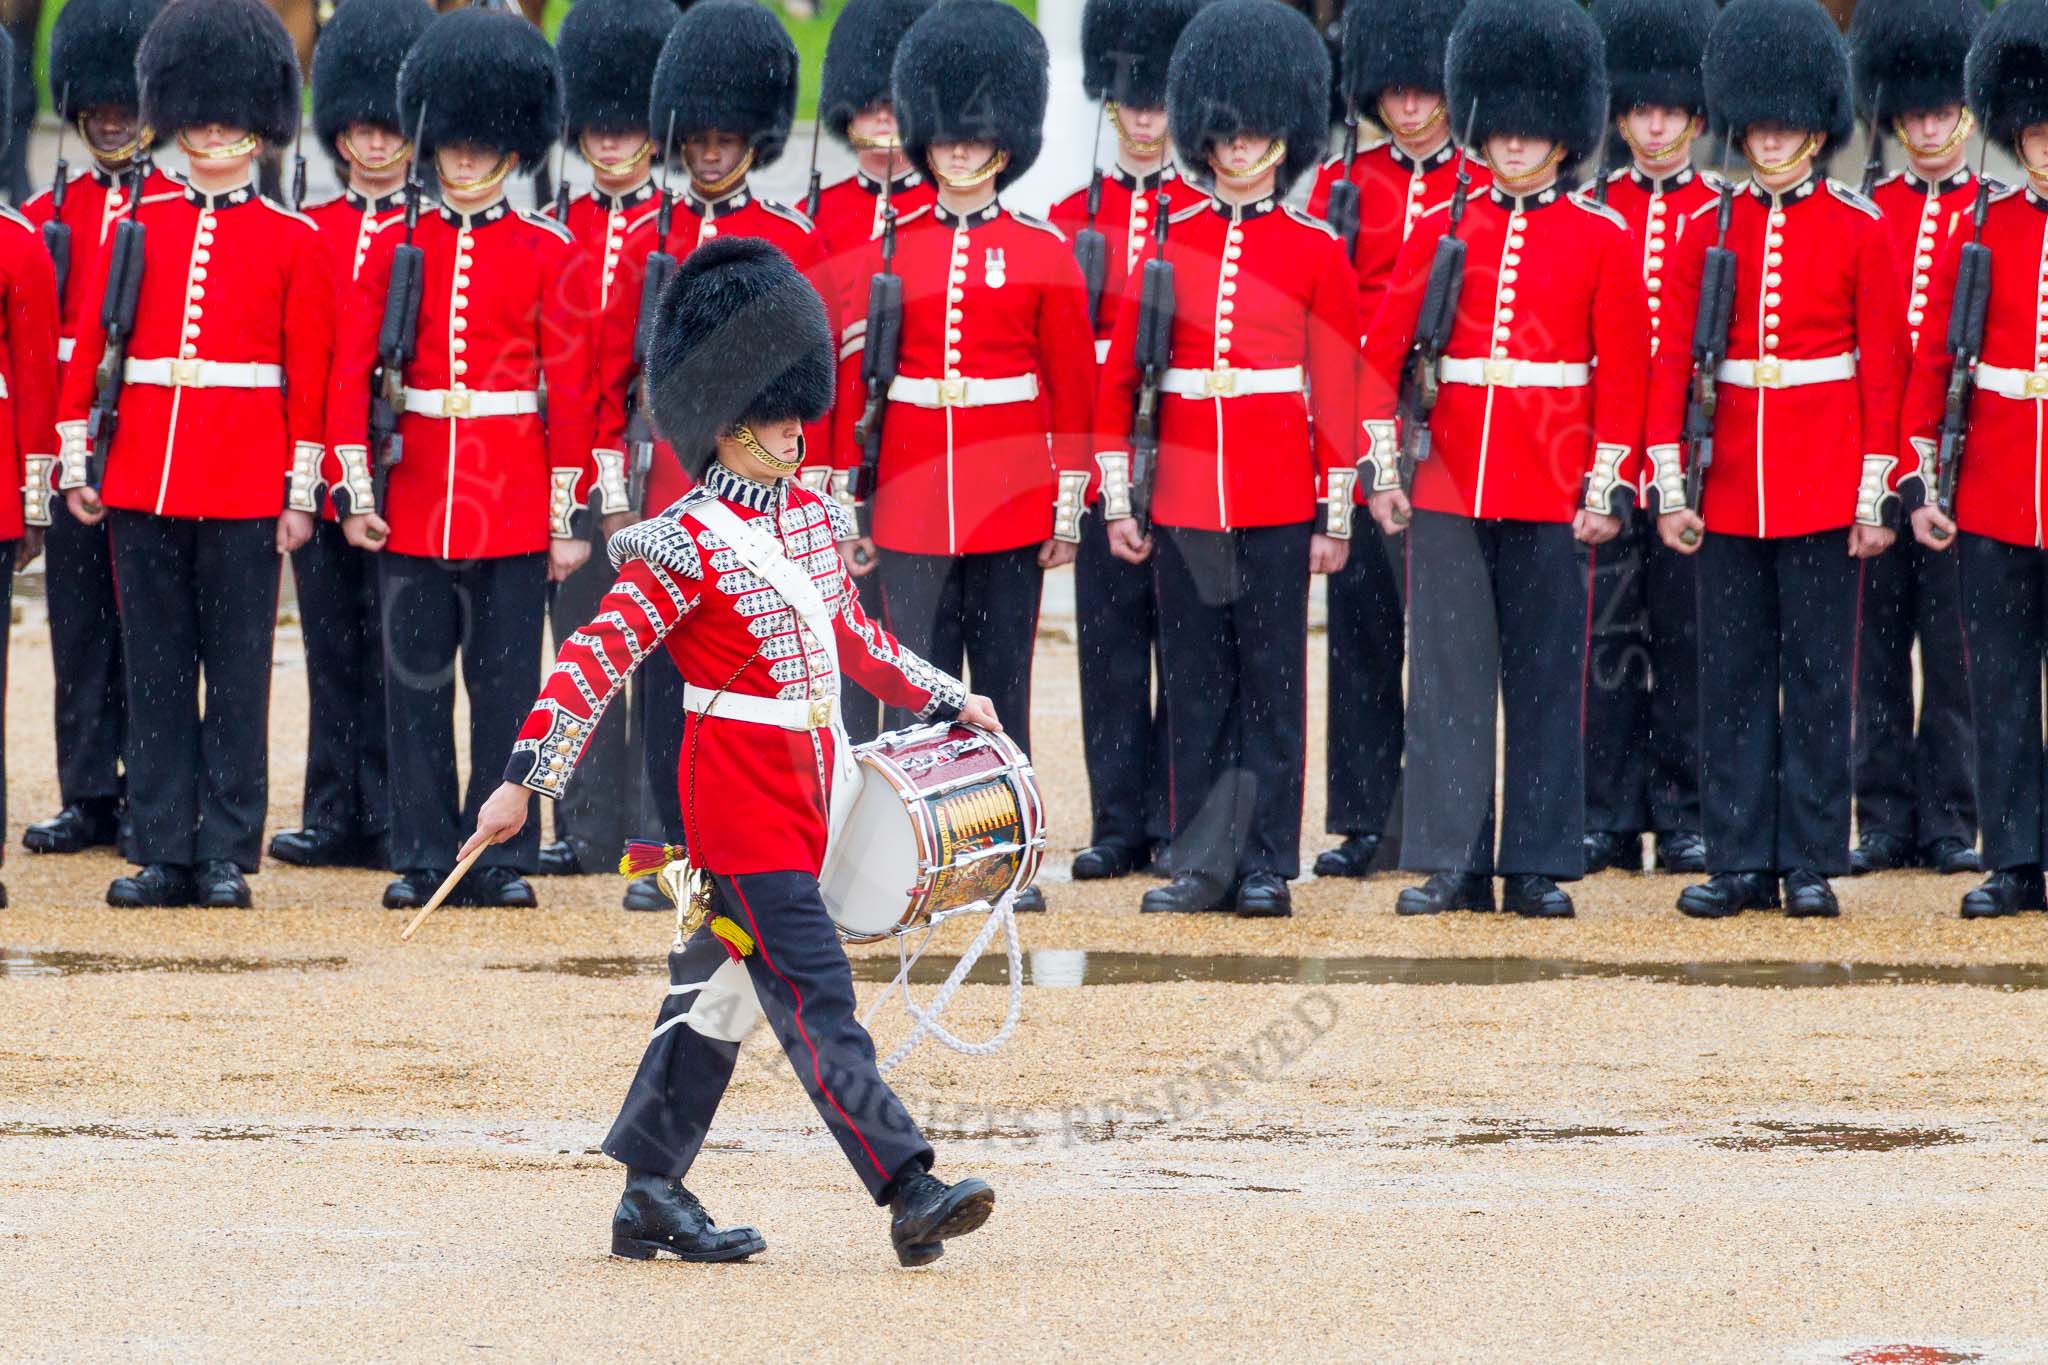 The Colonel's Review 2014.
Horse Guards Parade, Westminster,
London,

United Kingdom,
on 07 June 2014 at 11:14, image #354